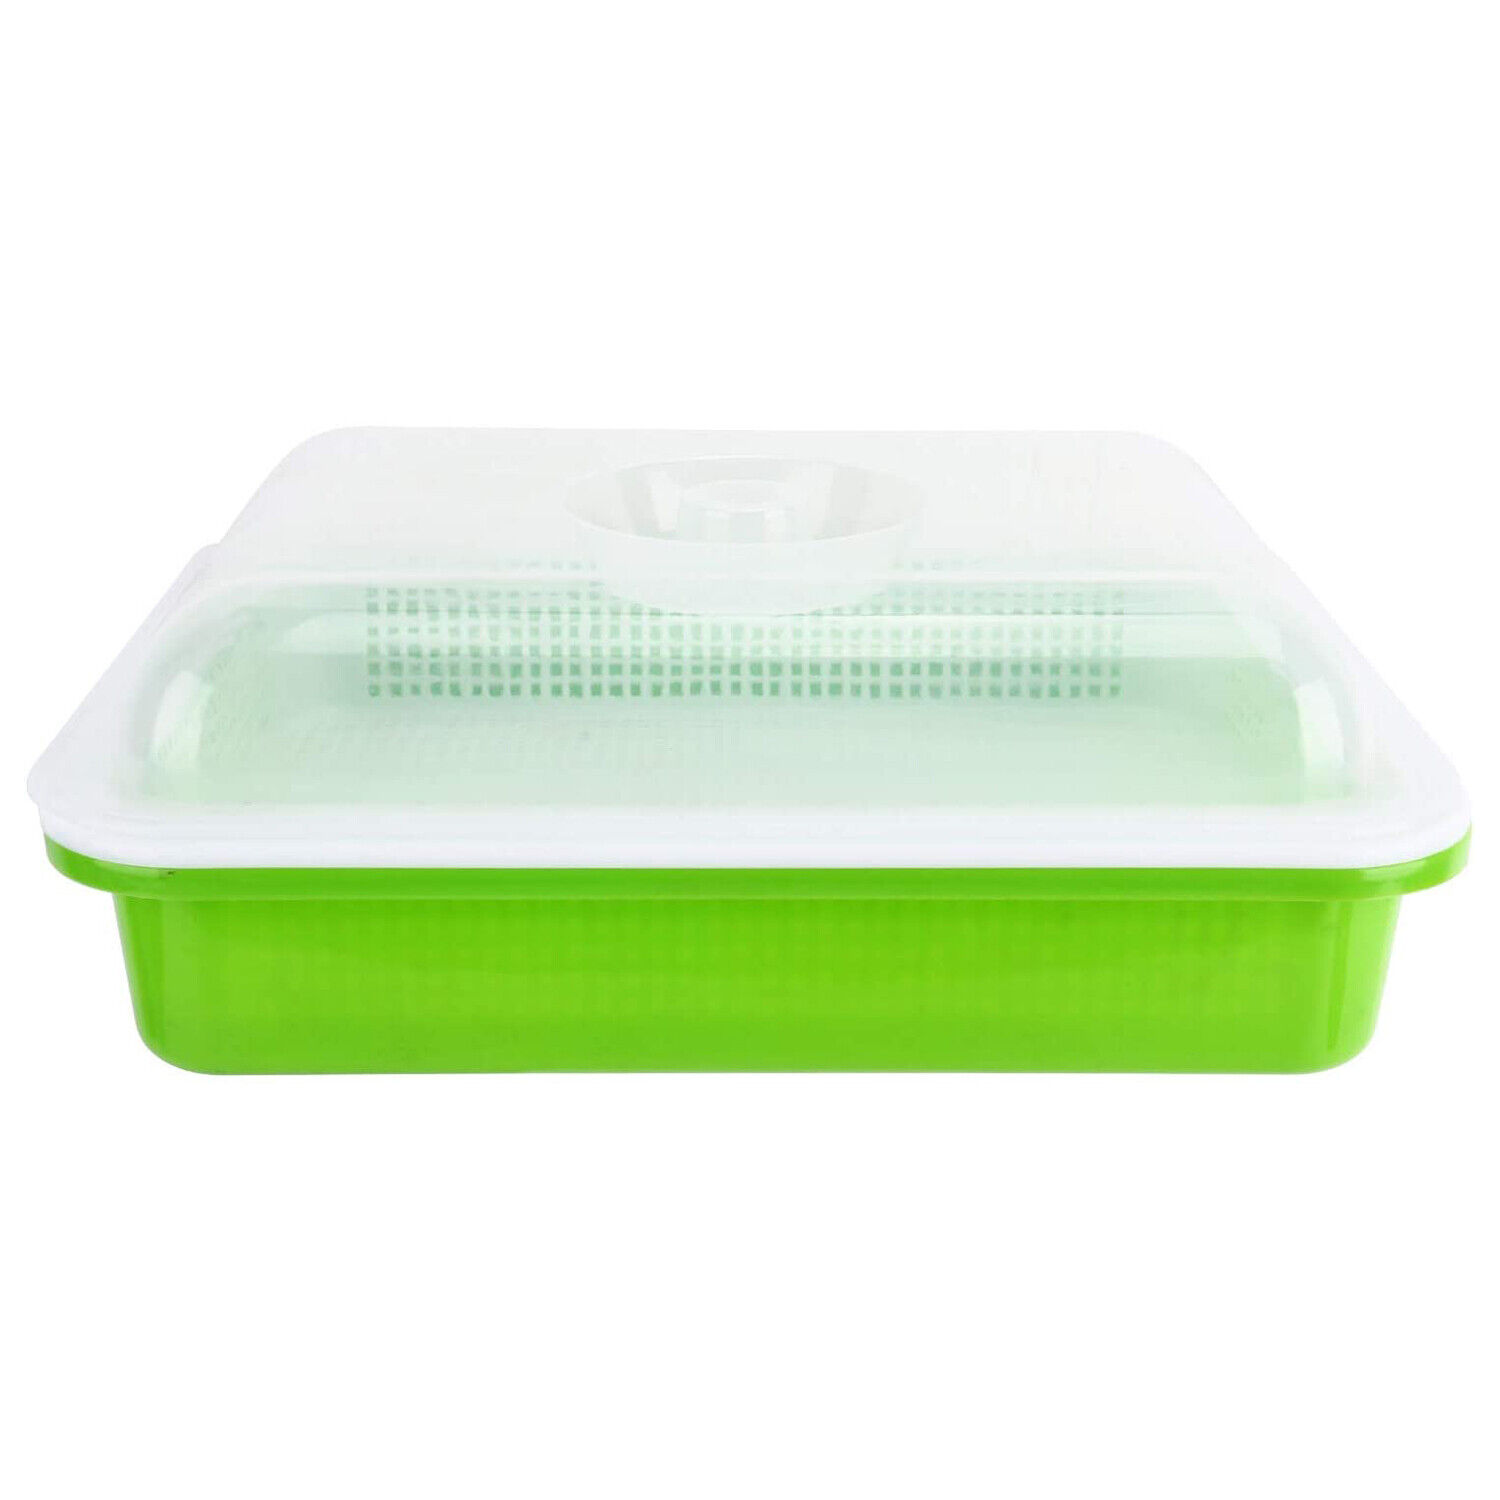 1/2/3//4/5Pack Seed Sprouter Tray Container Wheatgrass Grower with Lid Sprouting